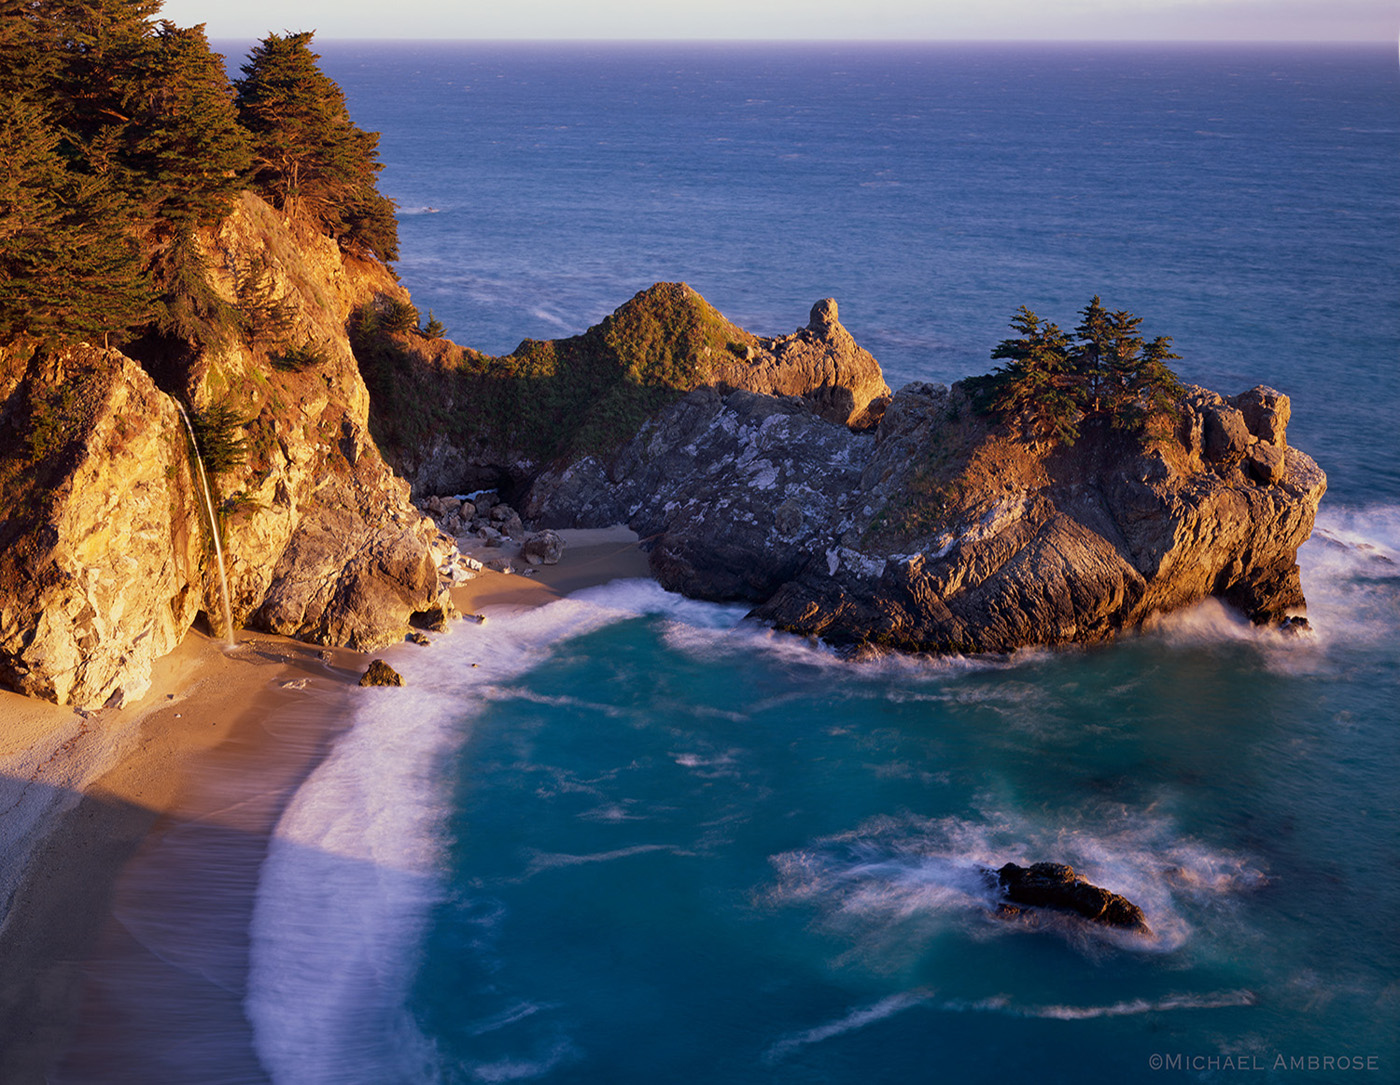 McWay Falls cascades onto golden sand lit by sunset light in the pristine cove at Julia Pfeiffer State Park in the Big Sur section of California coast. 